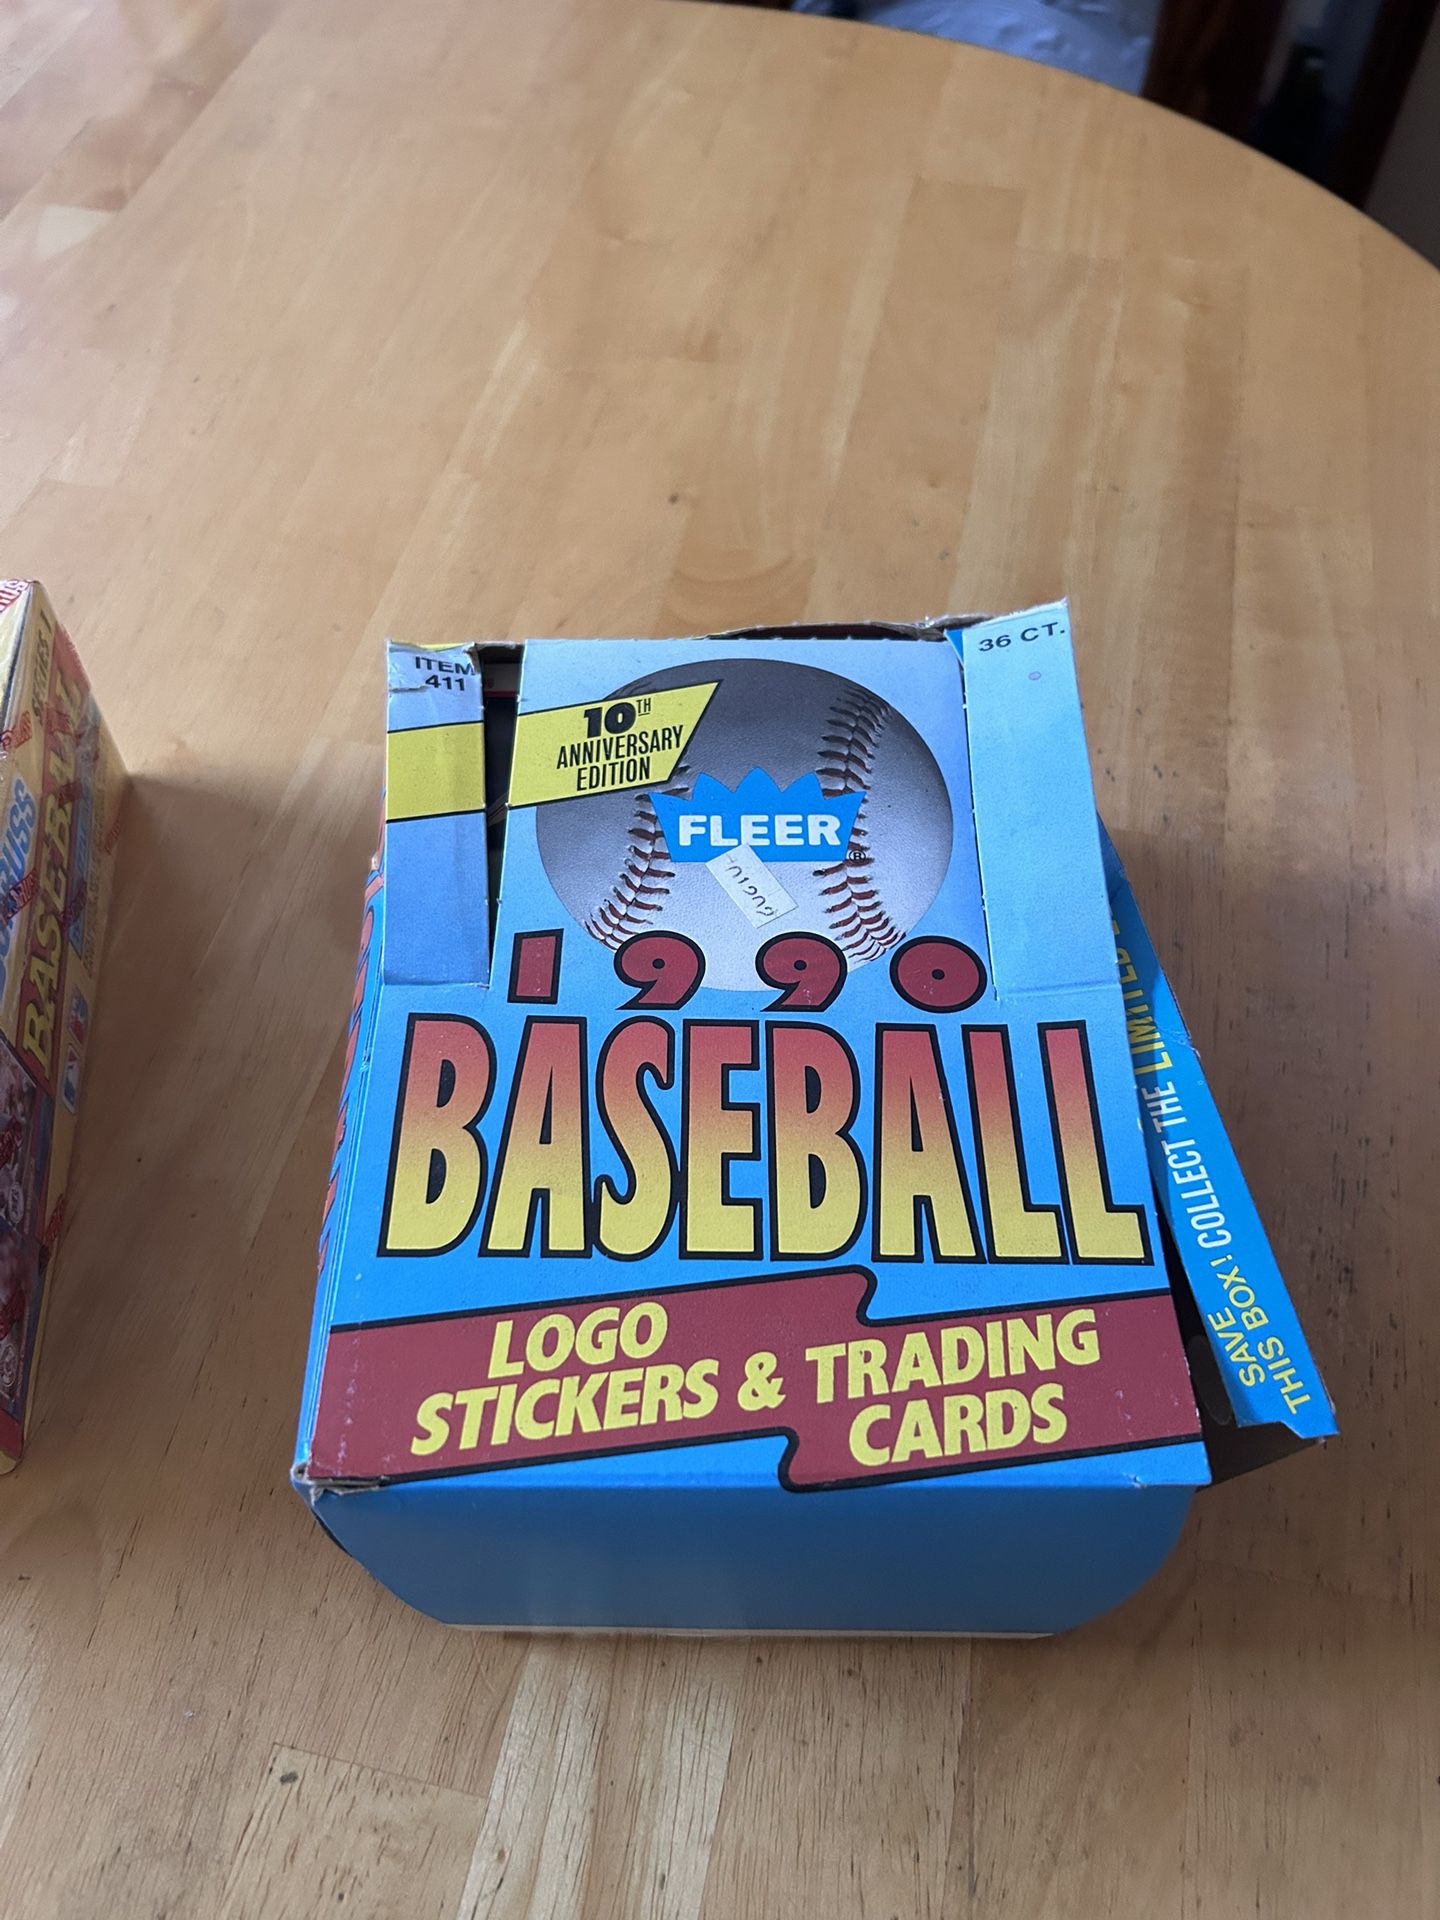 Baseball Logos Stickers And Trading Cards